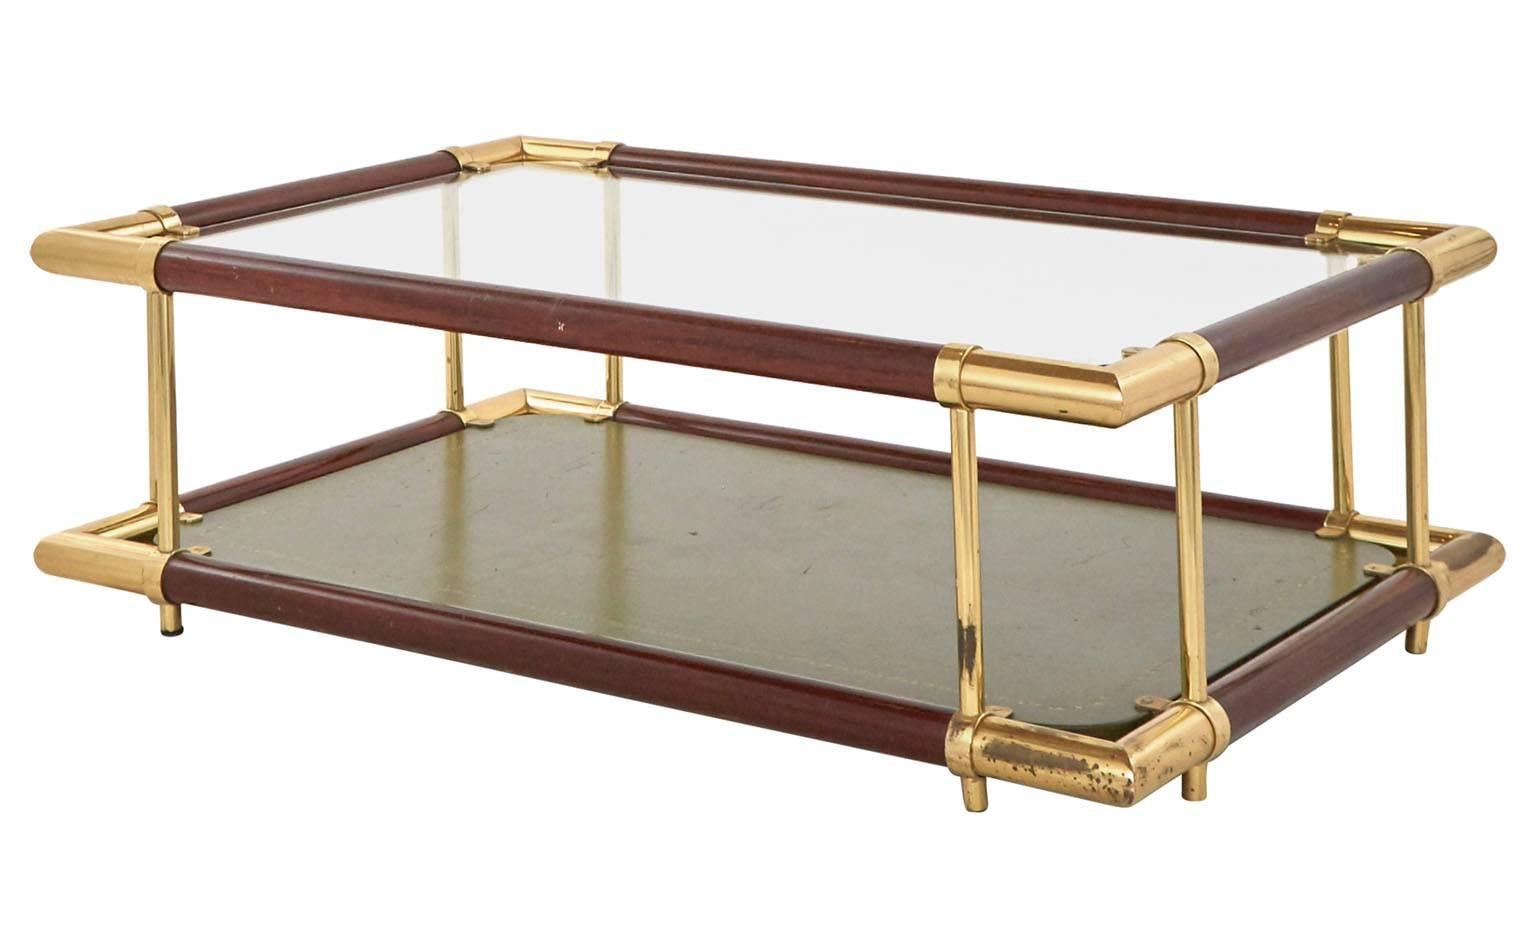 Spanish Vintage Brass and Wood Coffee Table